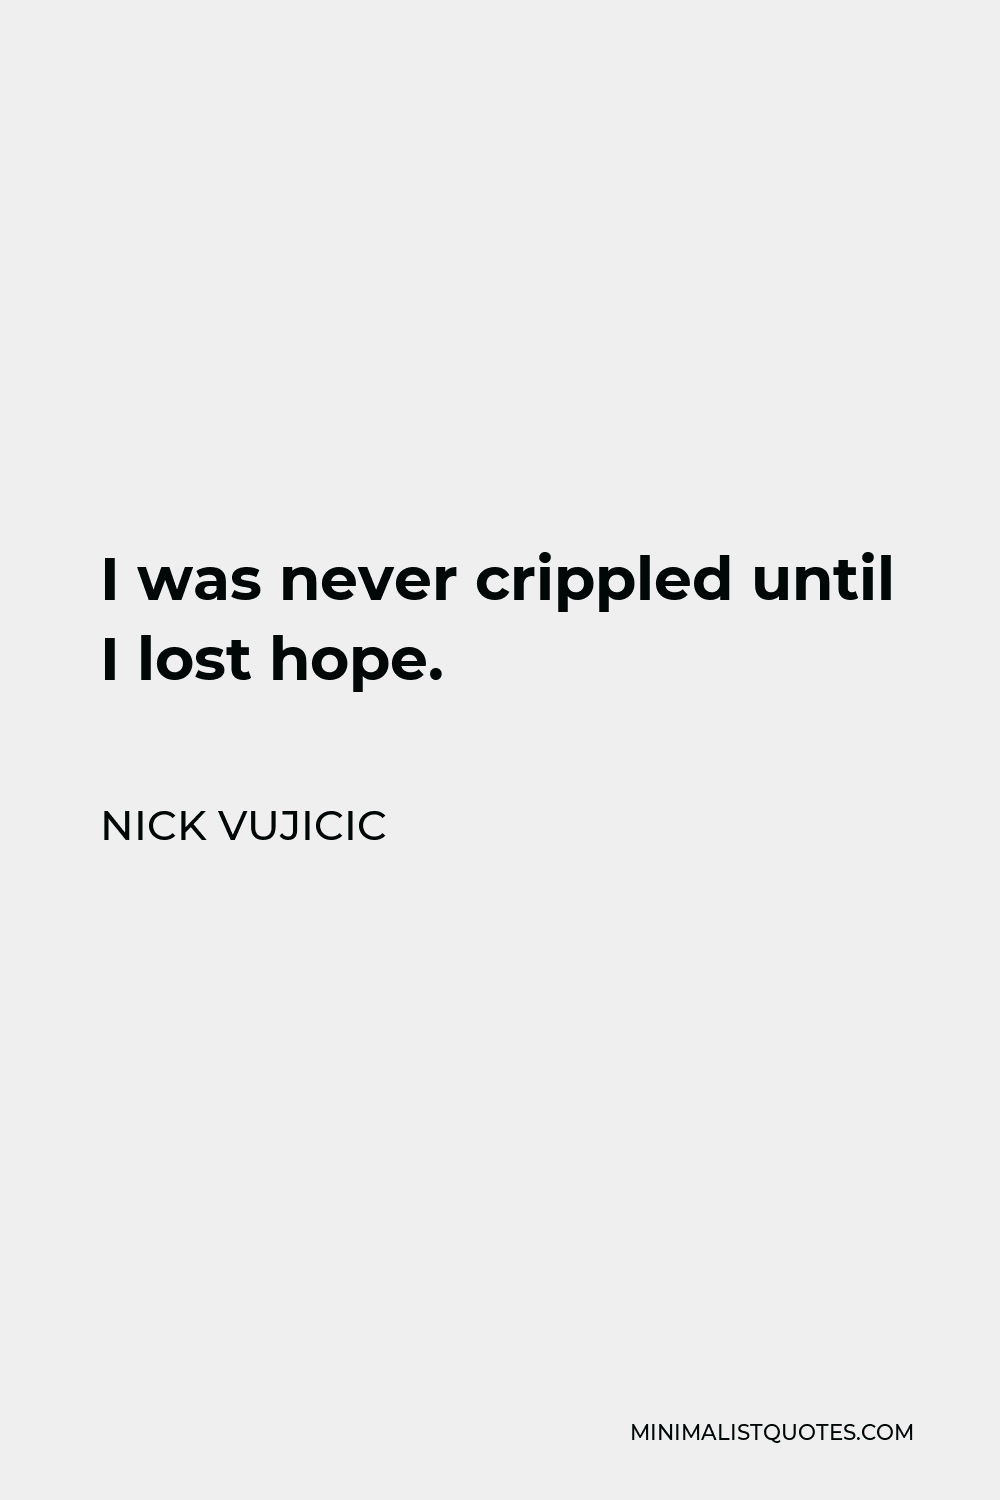 Nick Vujicic Quote - I was never crippled until I lost hope.